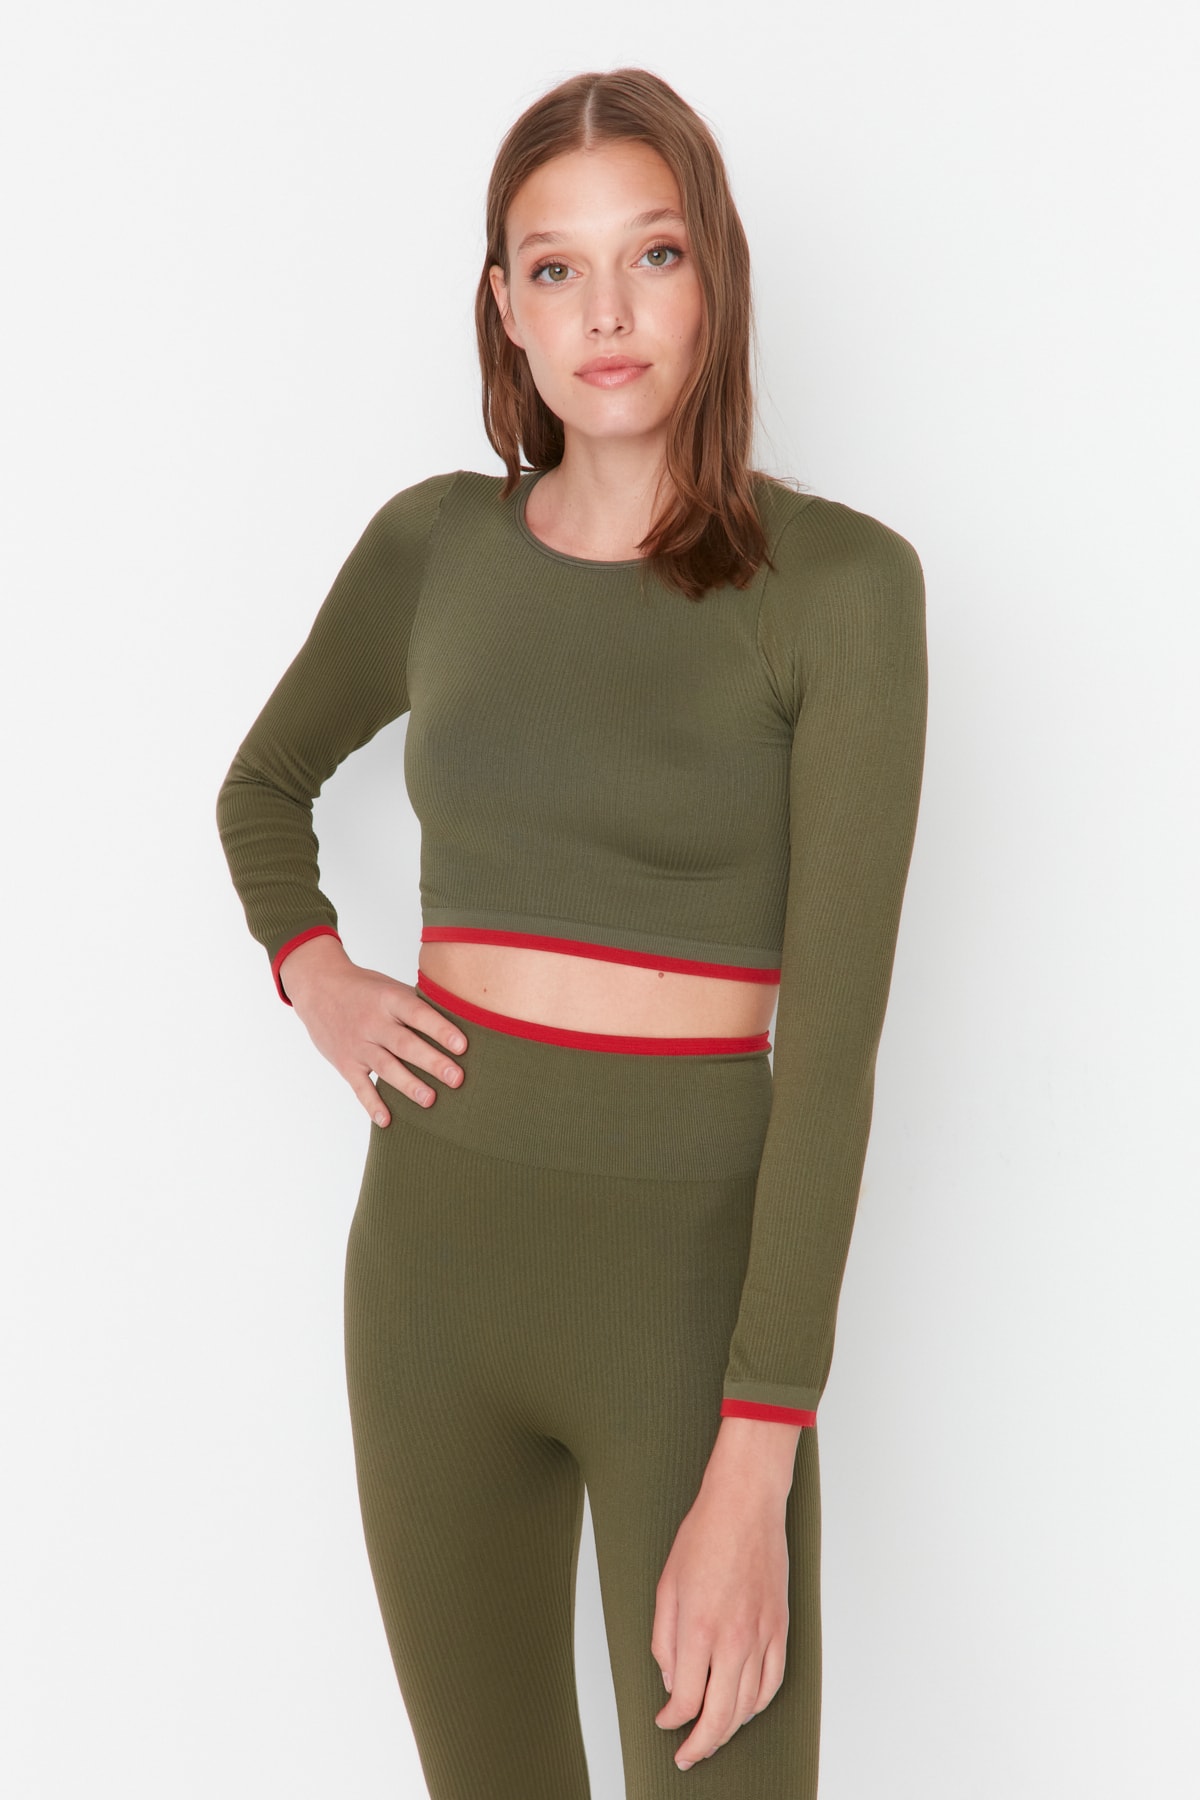 Trendyol Khaki Seamless/Seamless Crop Extra Stretchy Contrast Color Detail Knitted Sports Top/Blouse